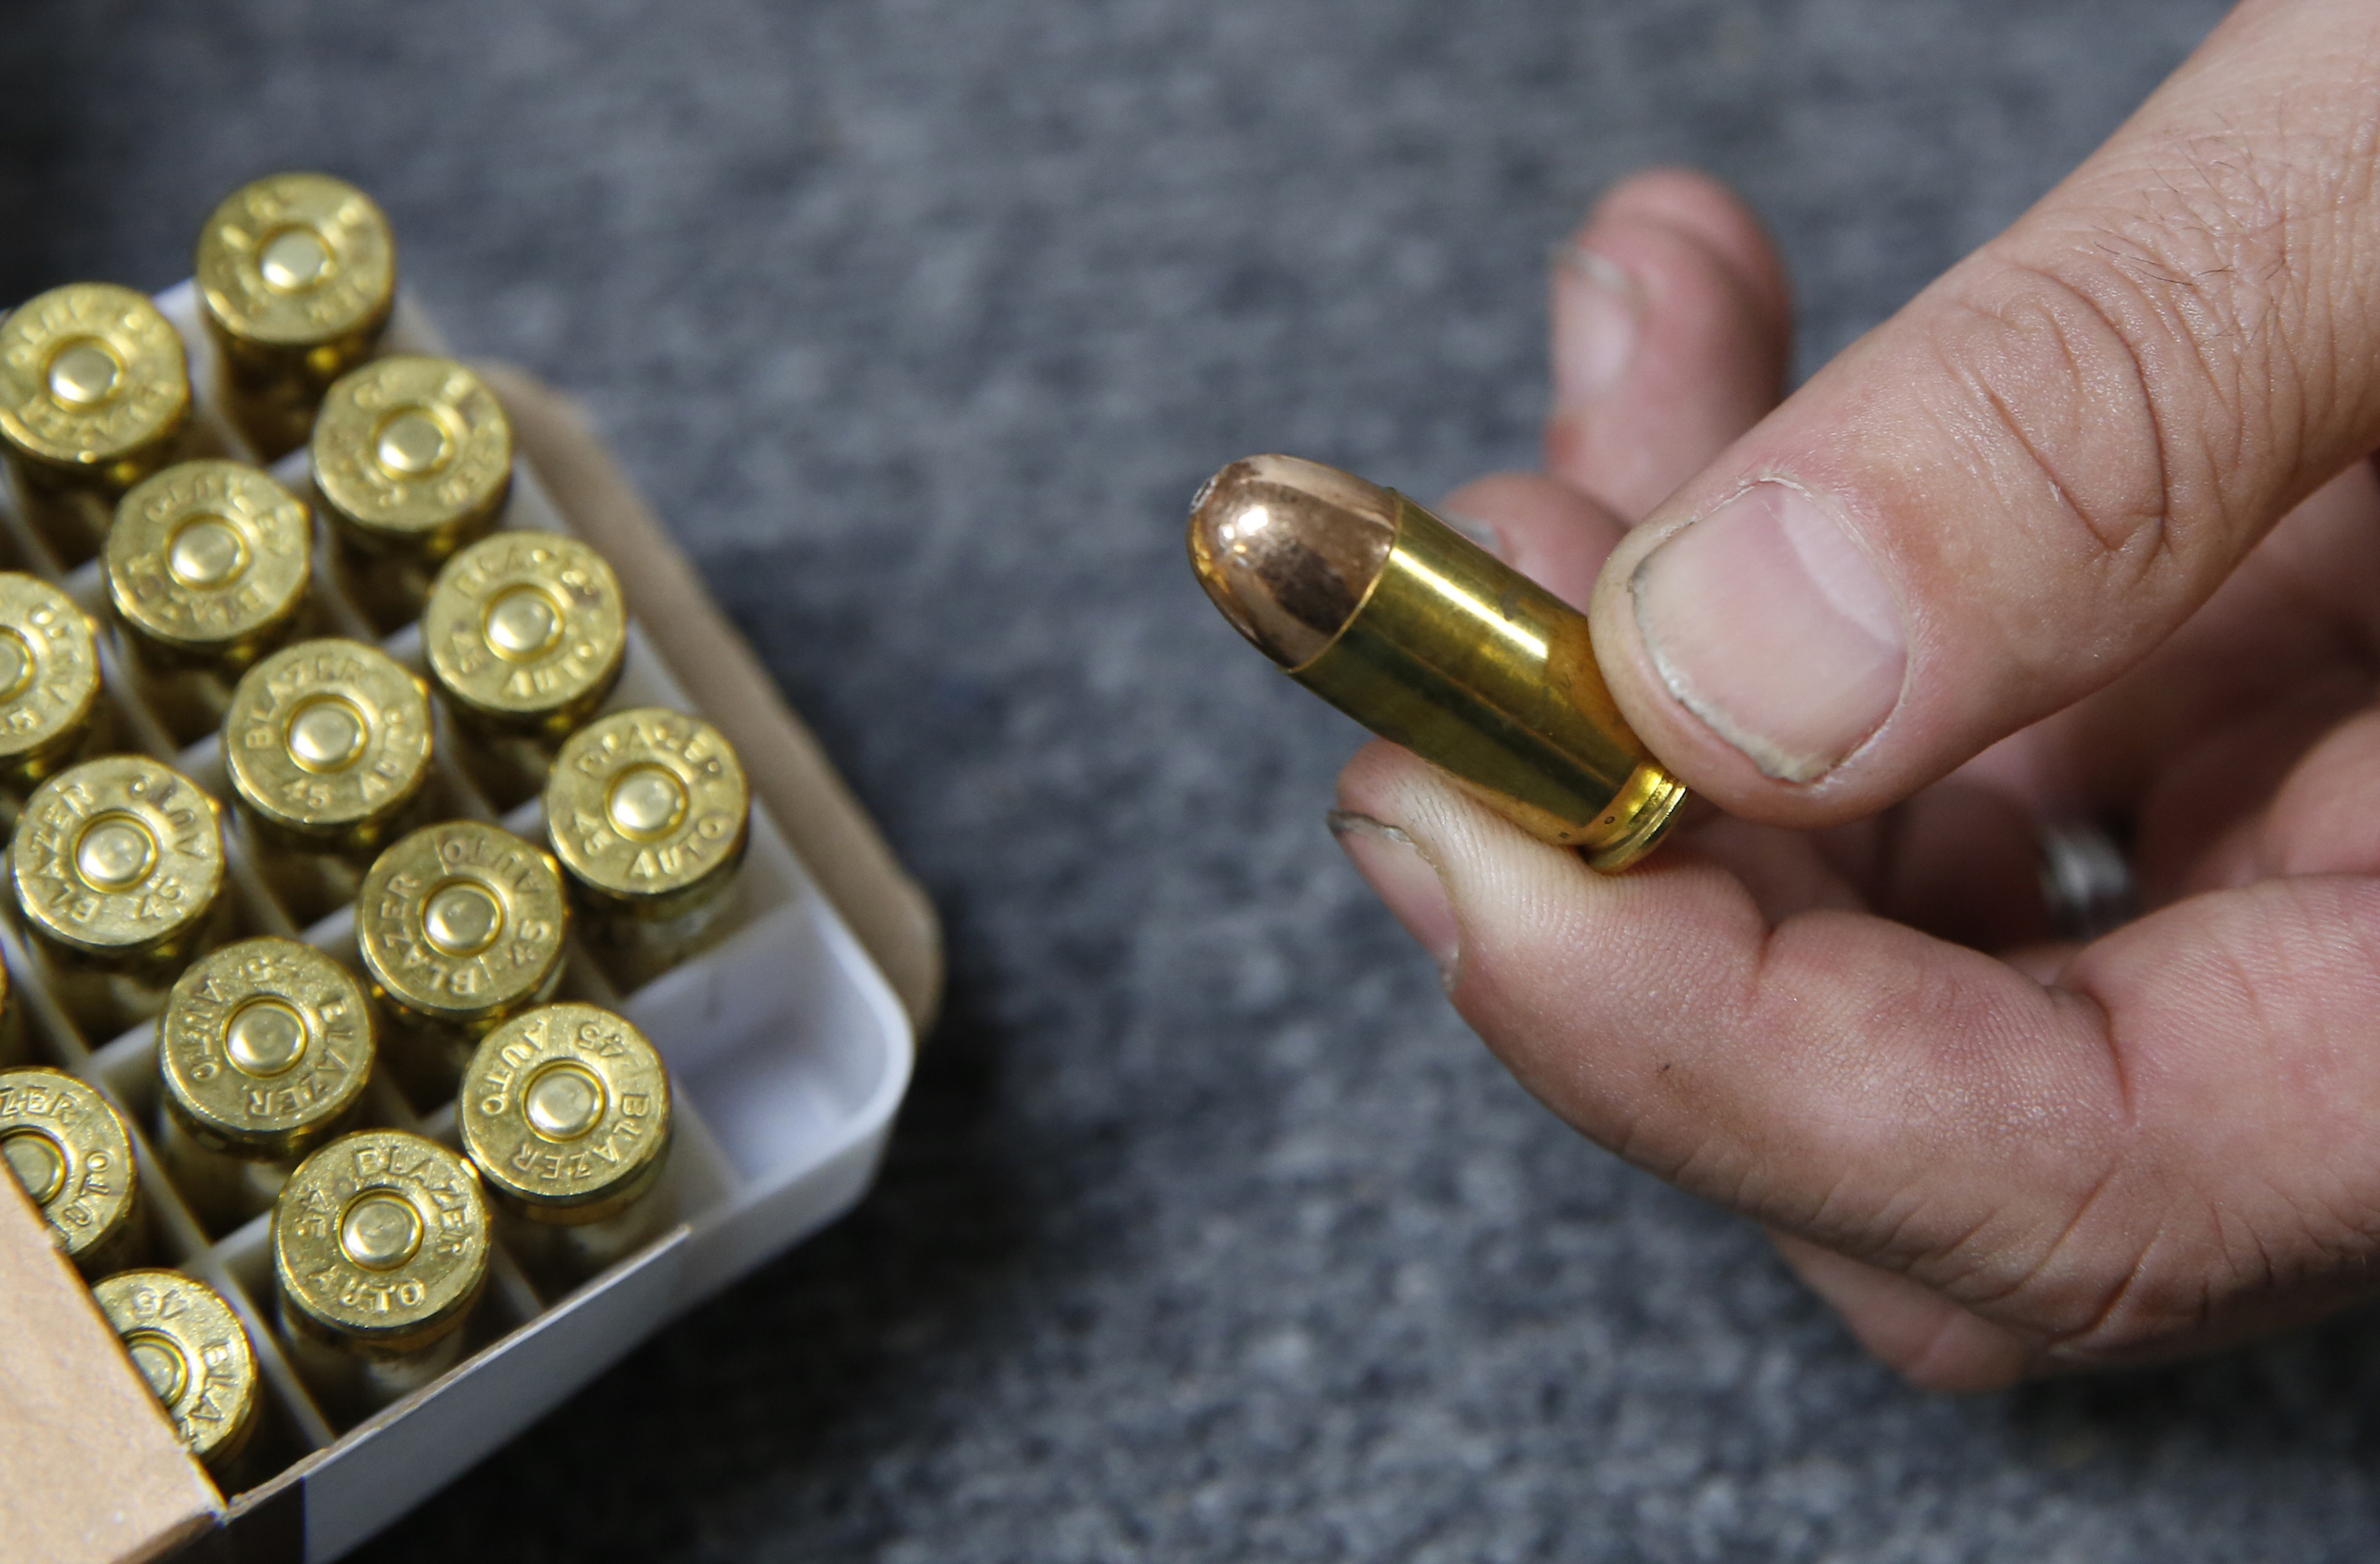 What Is Microstamping, and Does It Work to Solve Shootings?